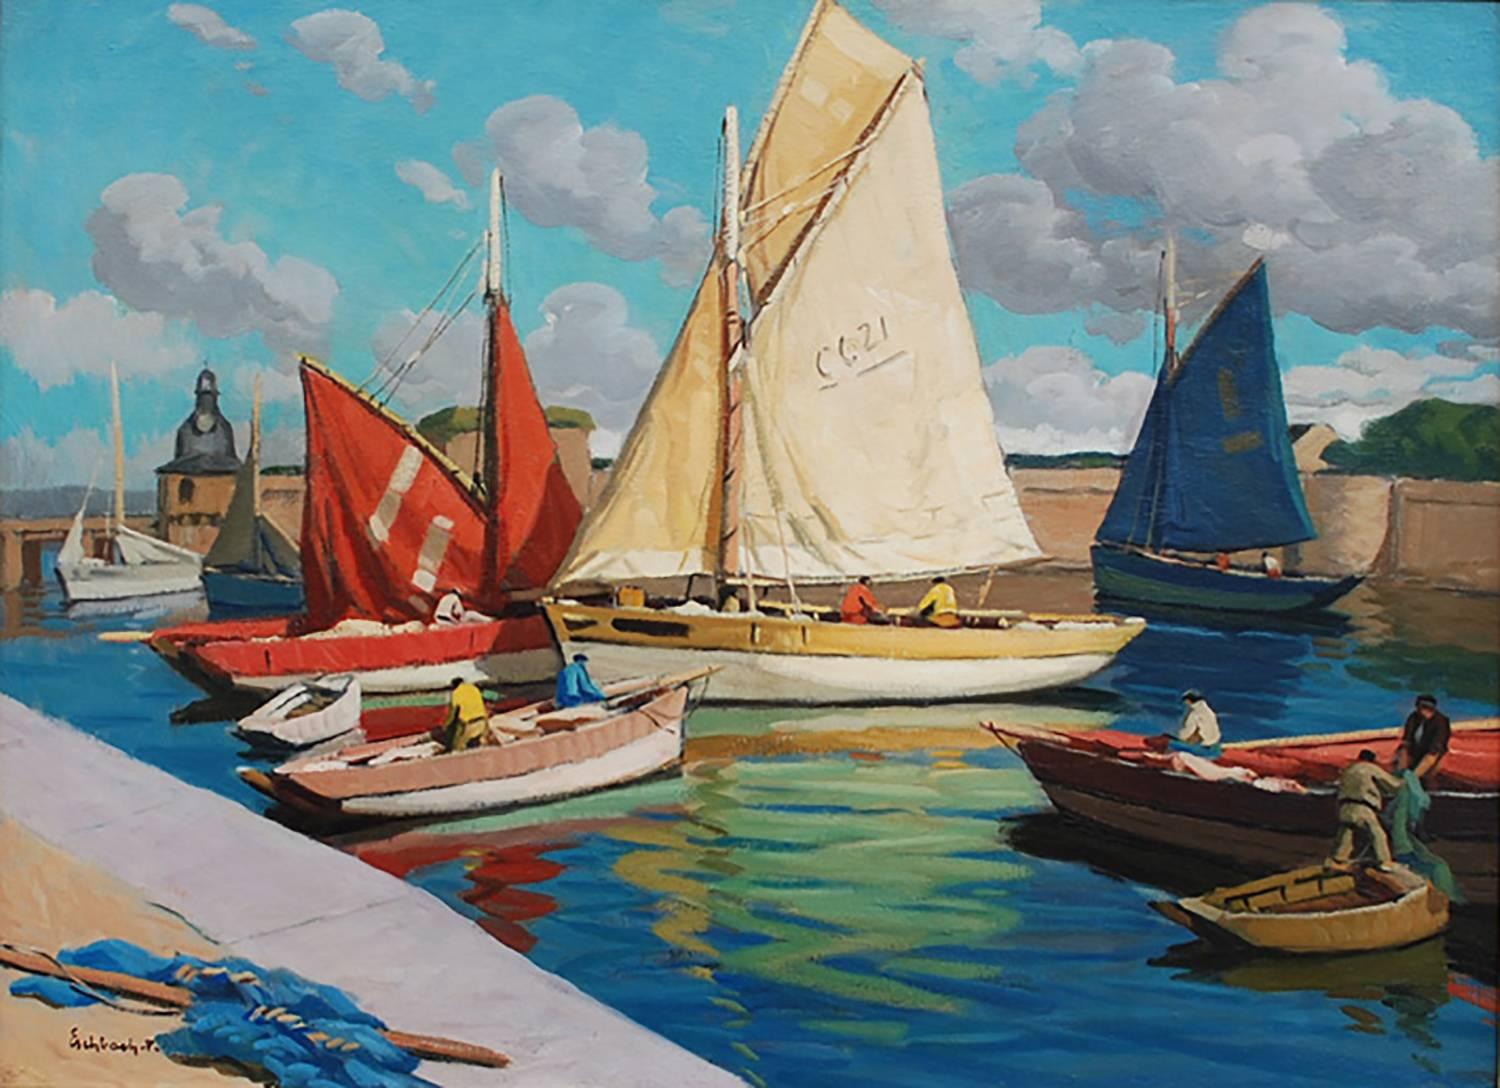 This oil on canvas painting by French artist Paul André Jean Eschbach (1881-1961) is entitled "Concarneau Harbor" and was painted in the first half of the 20th century. This is a vibrant en-plein air depiction of the Port de Concarneau.